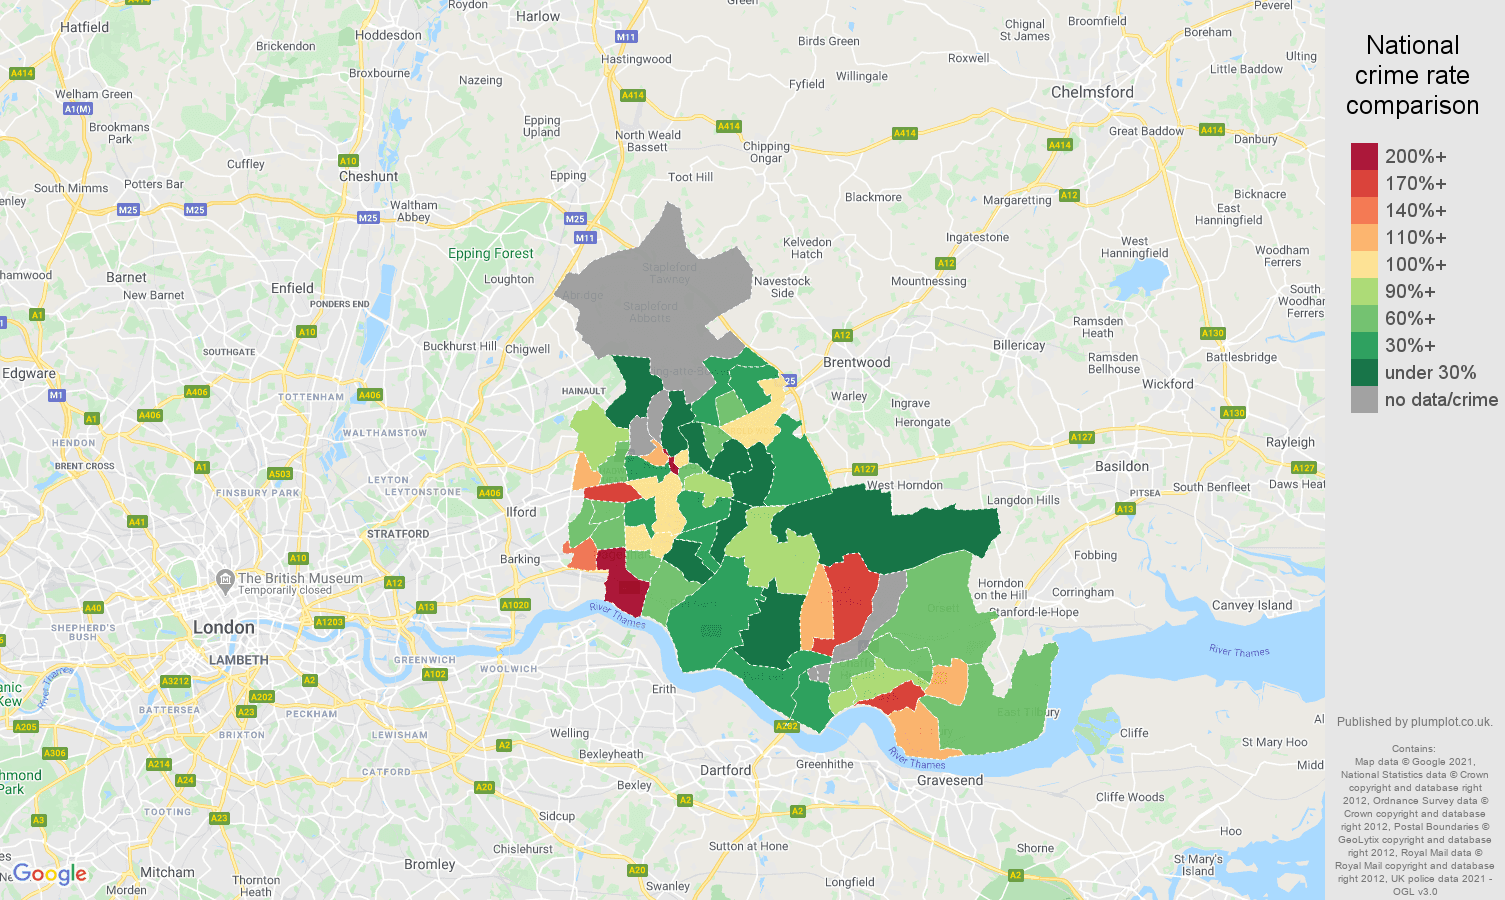 Romford bicycle theft crime rate comparison map